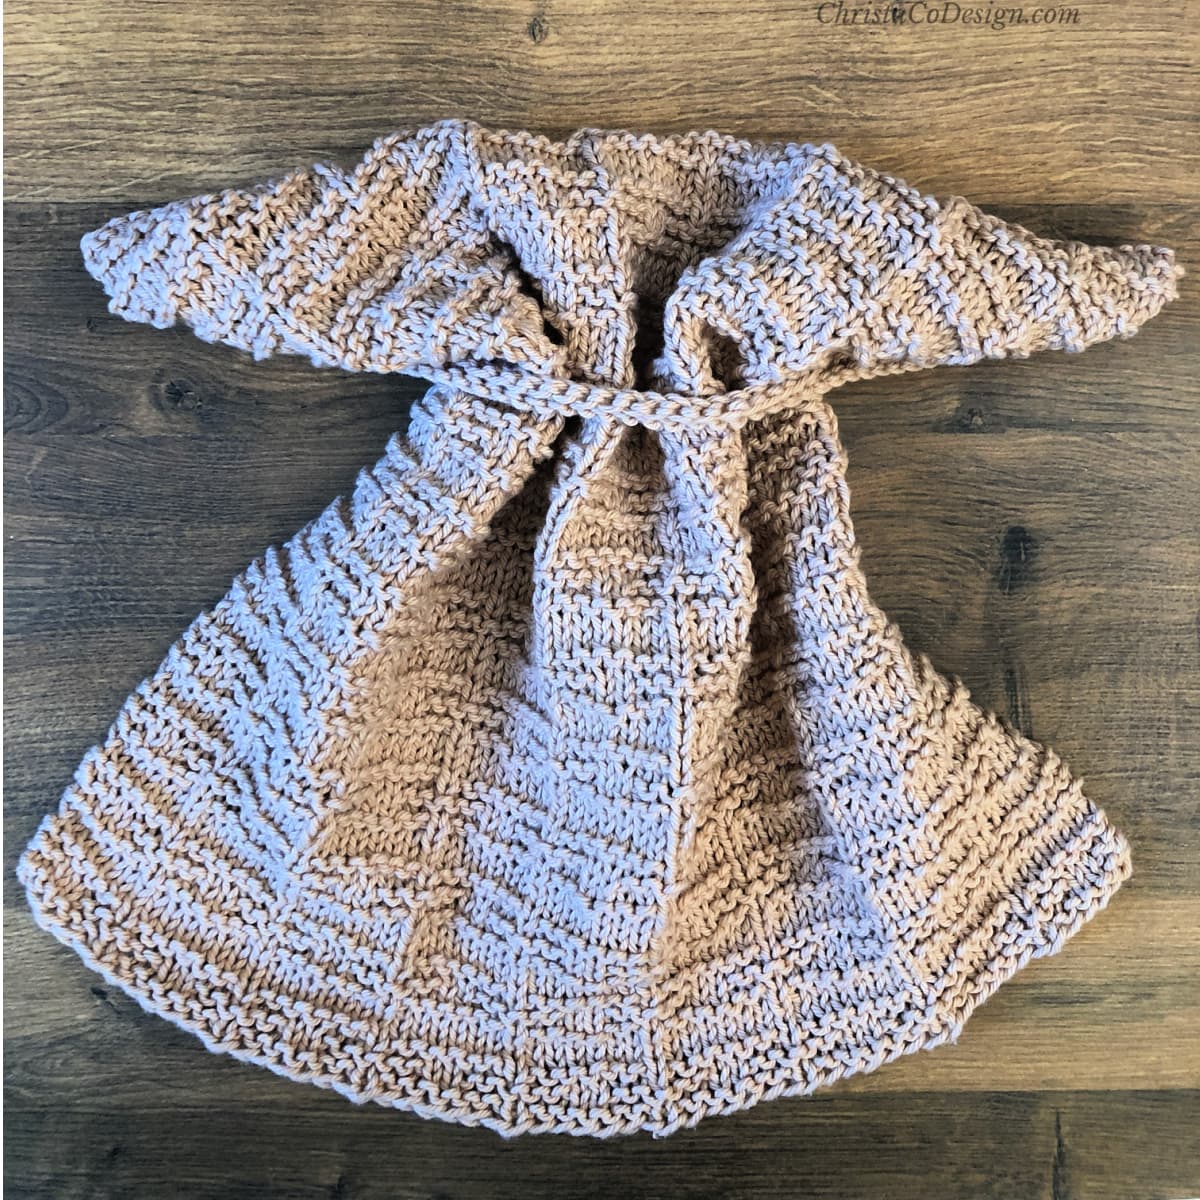 Beige knit dish towel with hanging loop threaded.